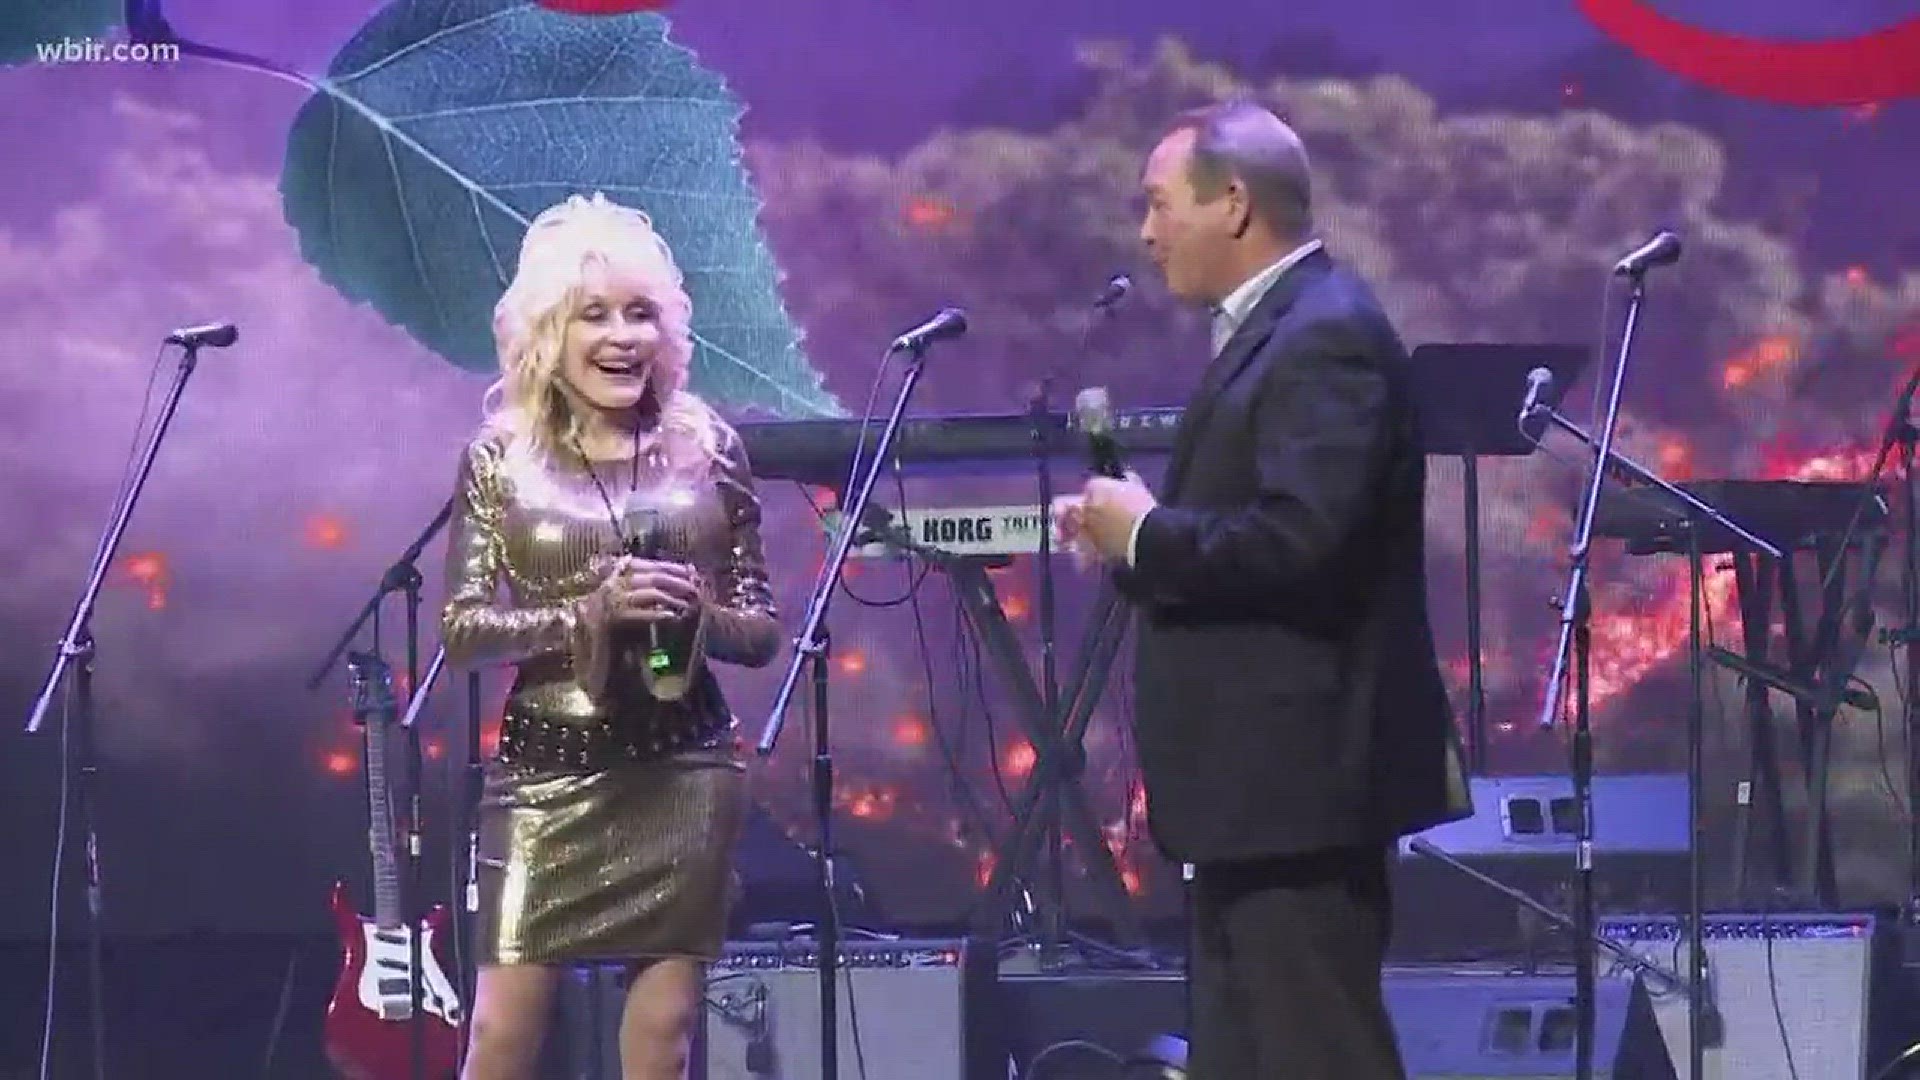 Dolly celebrated opening day for the latest season at Dollywood, giving people a taste of what's ahead in 2018.